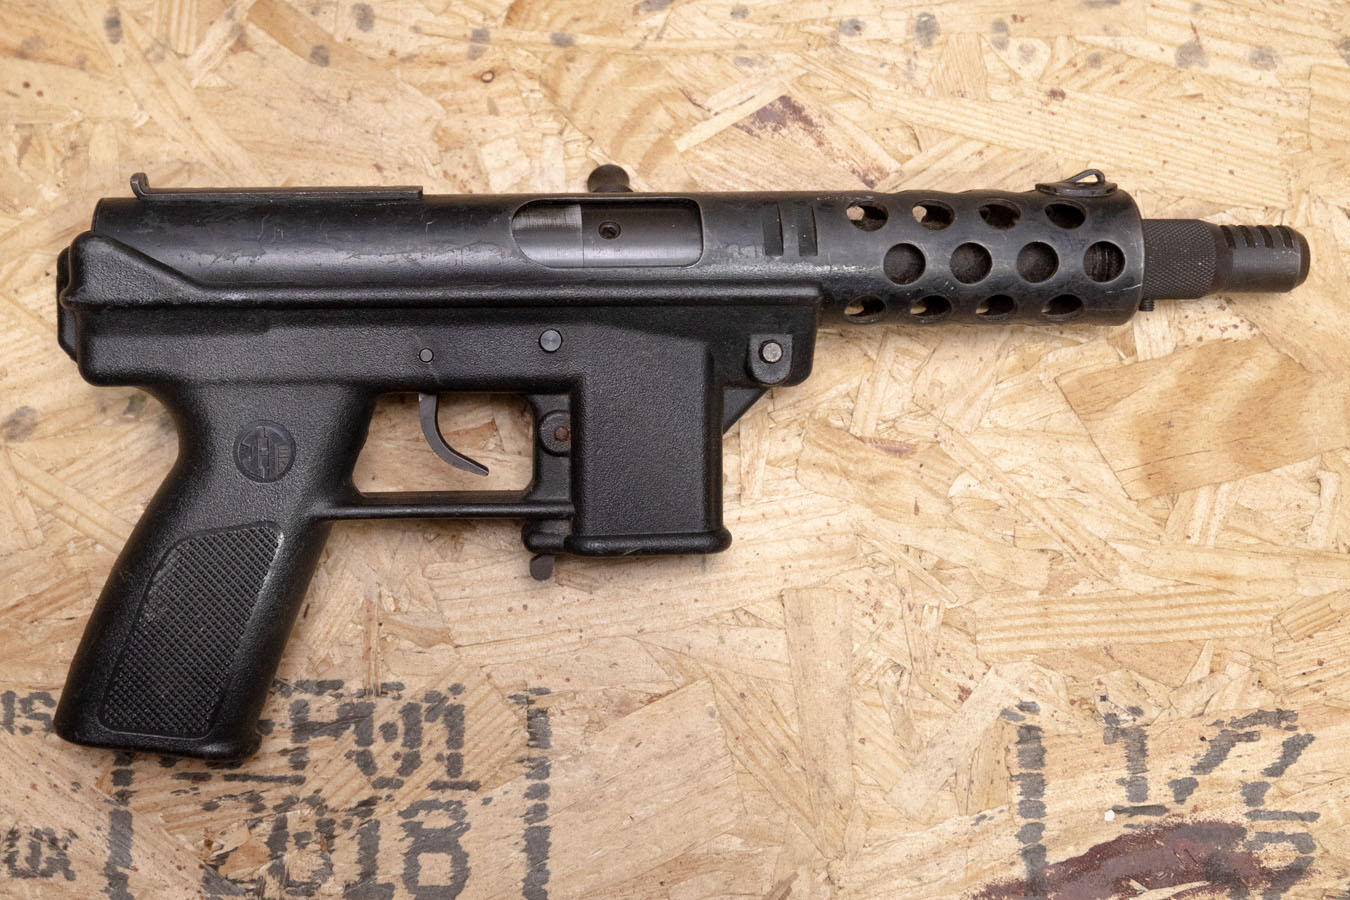 The Price Of A Tec-9: Factors To Consider